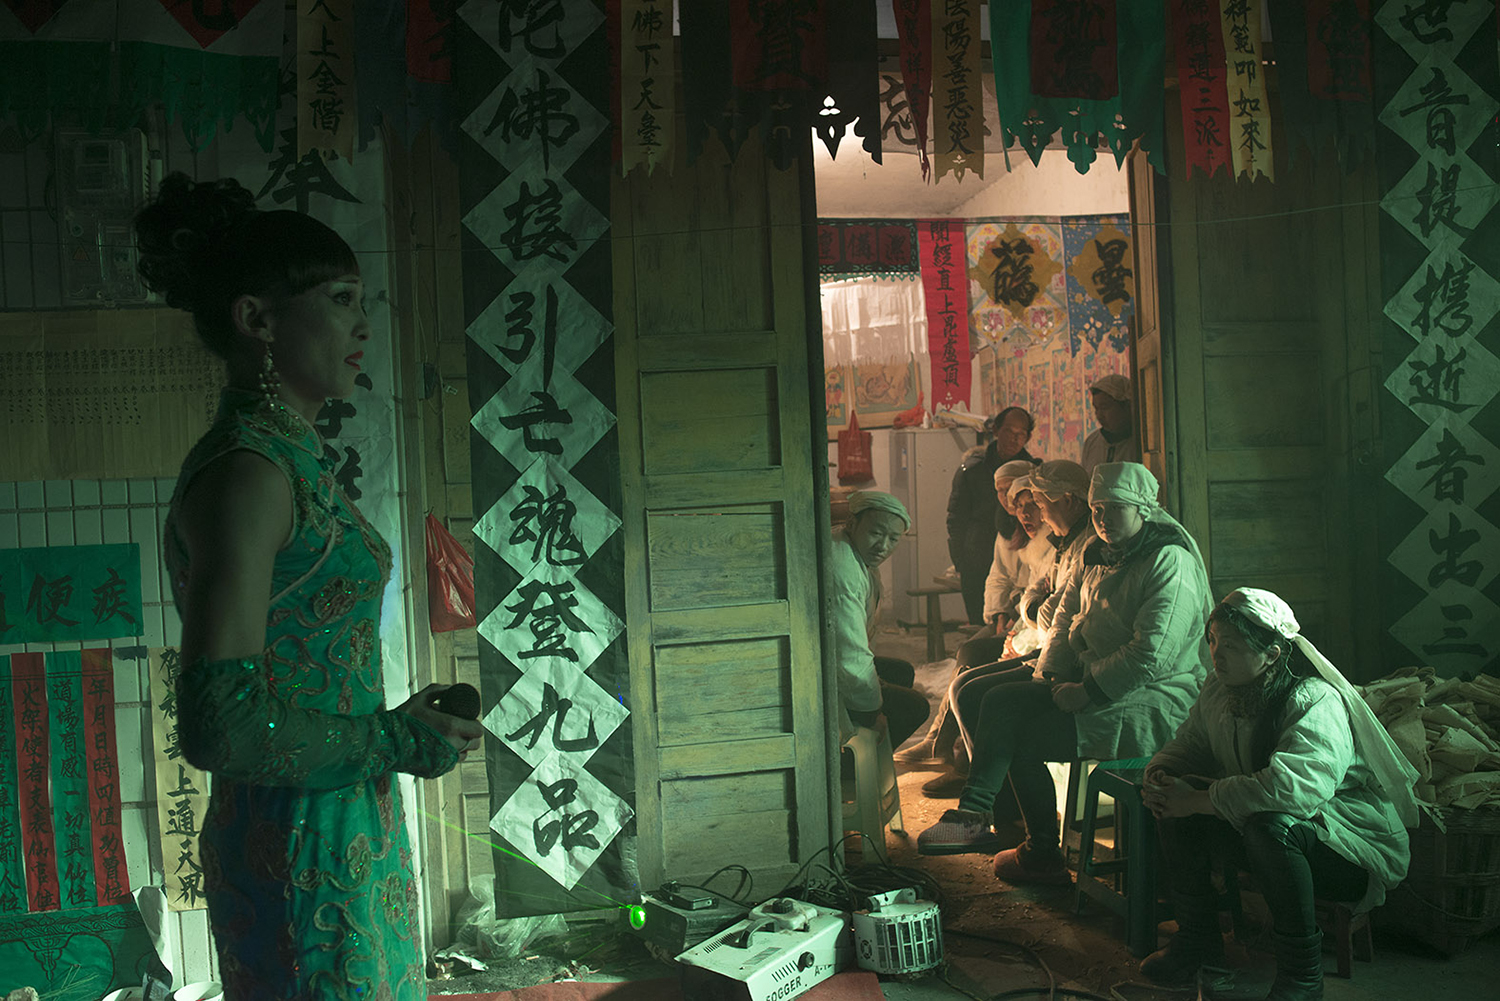 Family members of the departed watch Liangzi singing a song, December 23, 2014.